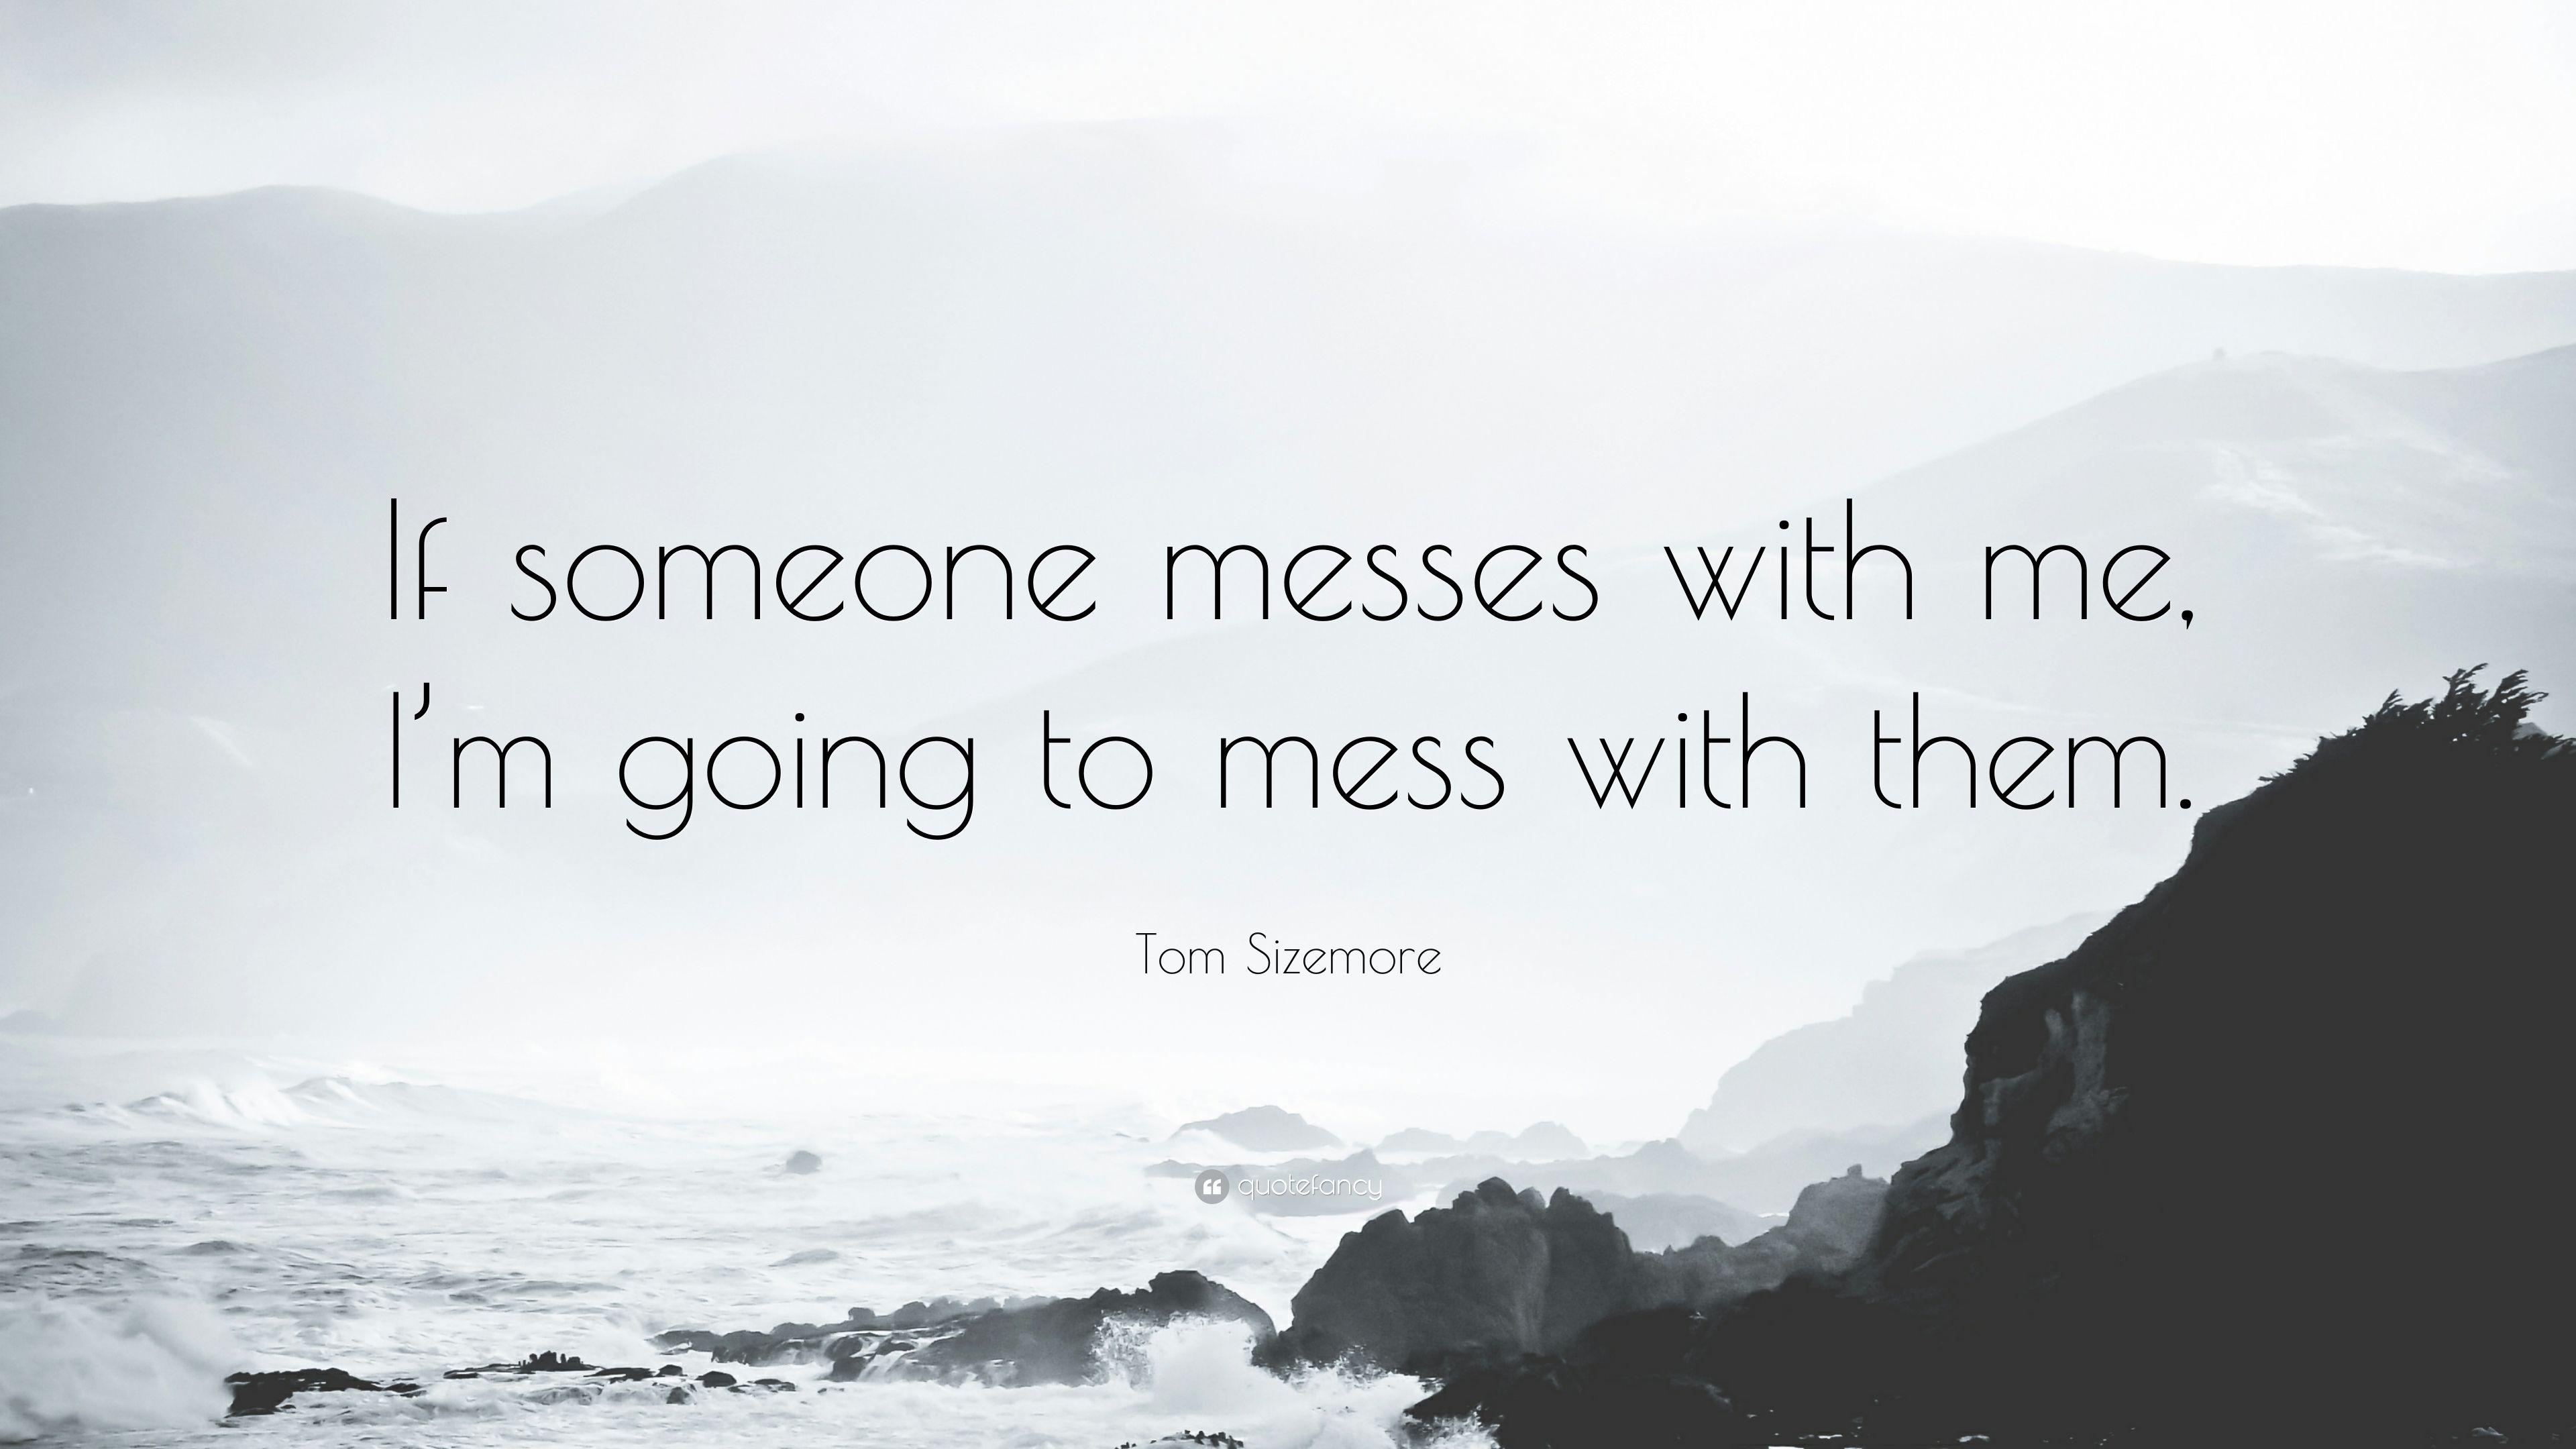 Tom Sizemore Quote: “If someone messes with me, I'm going to mess